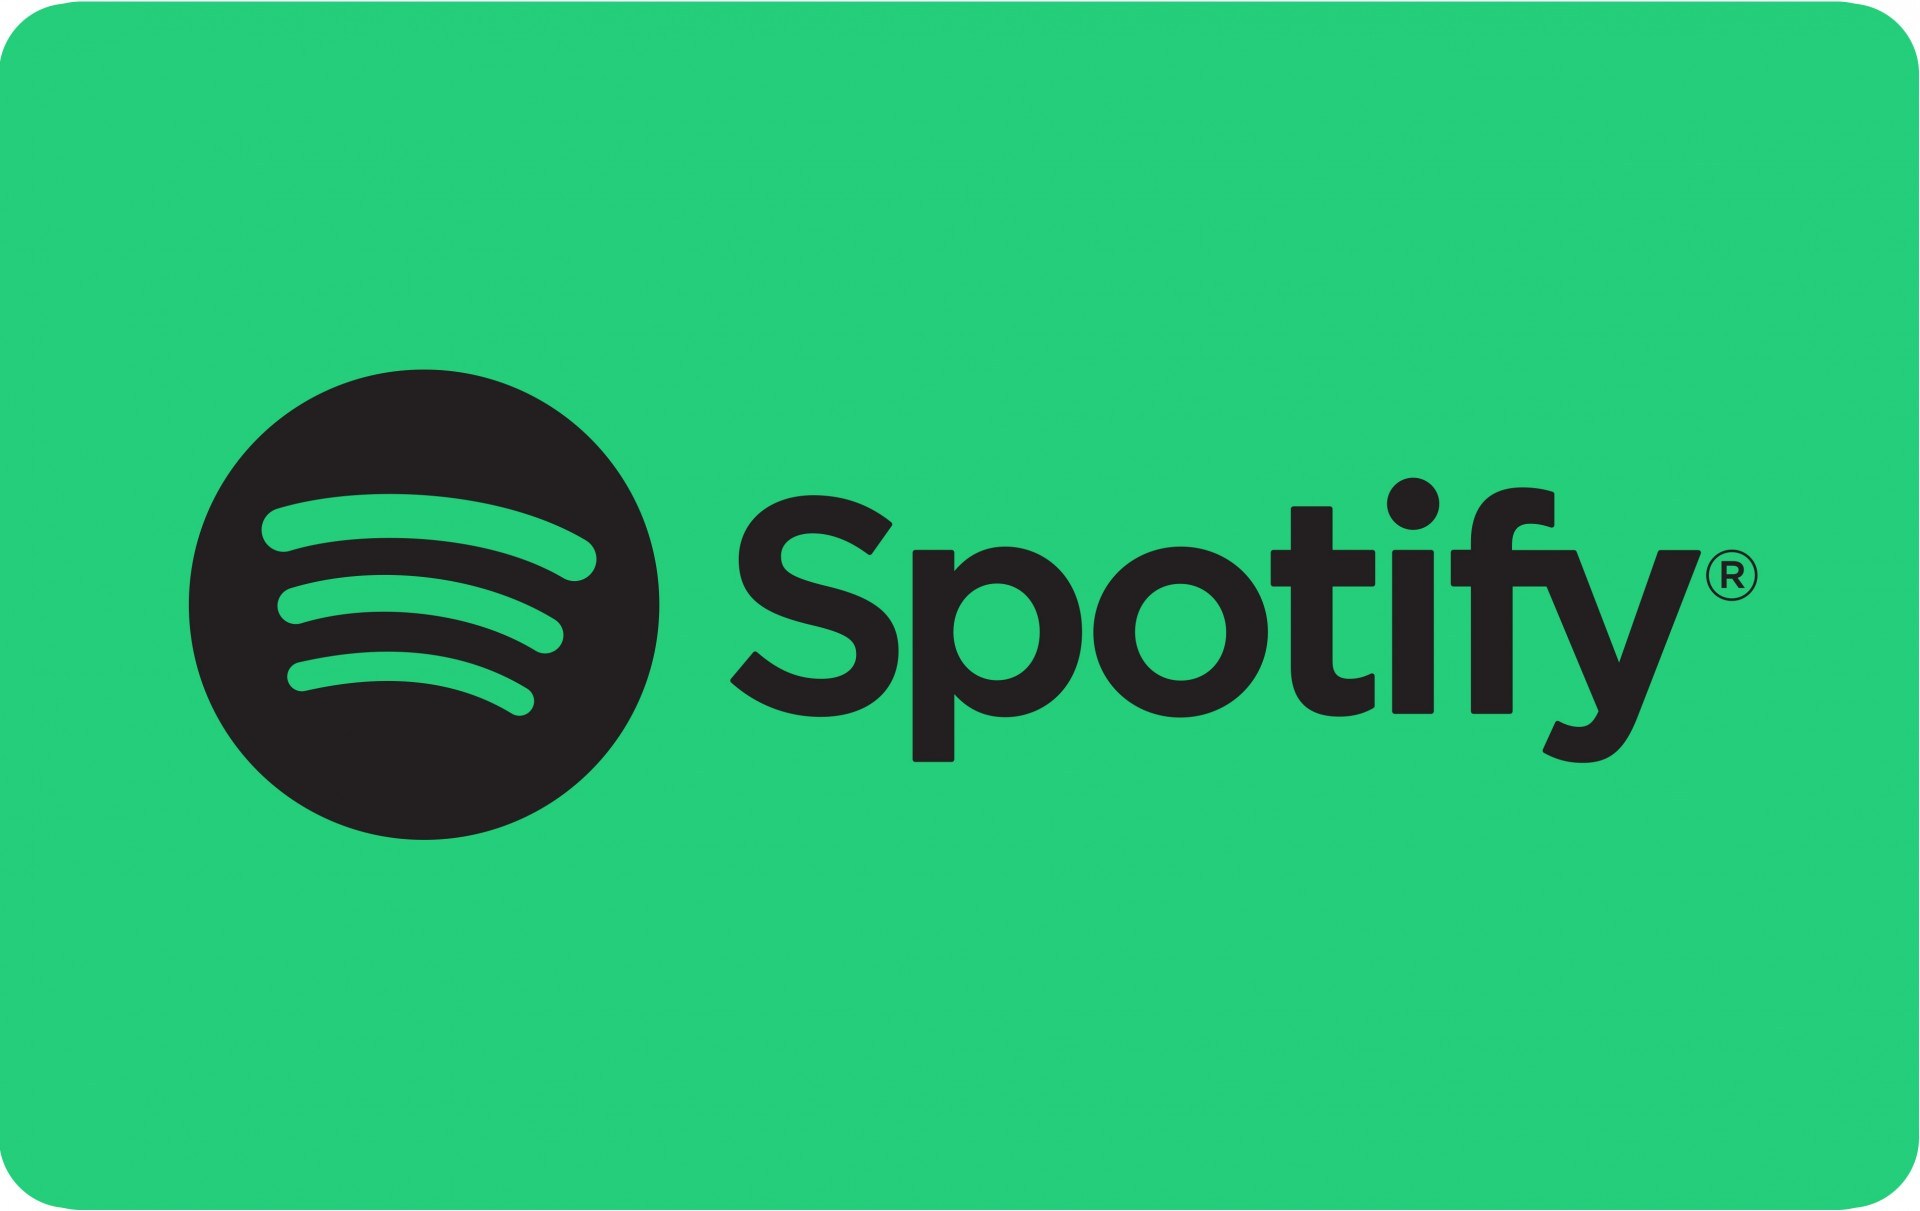 How much Venture Capital has Spotify Raised and From whom?